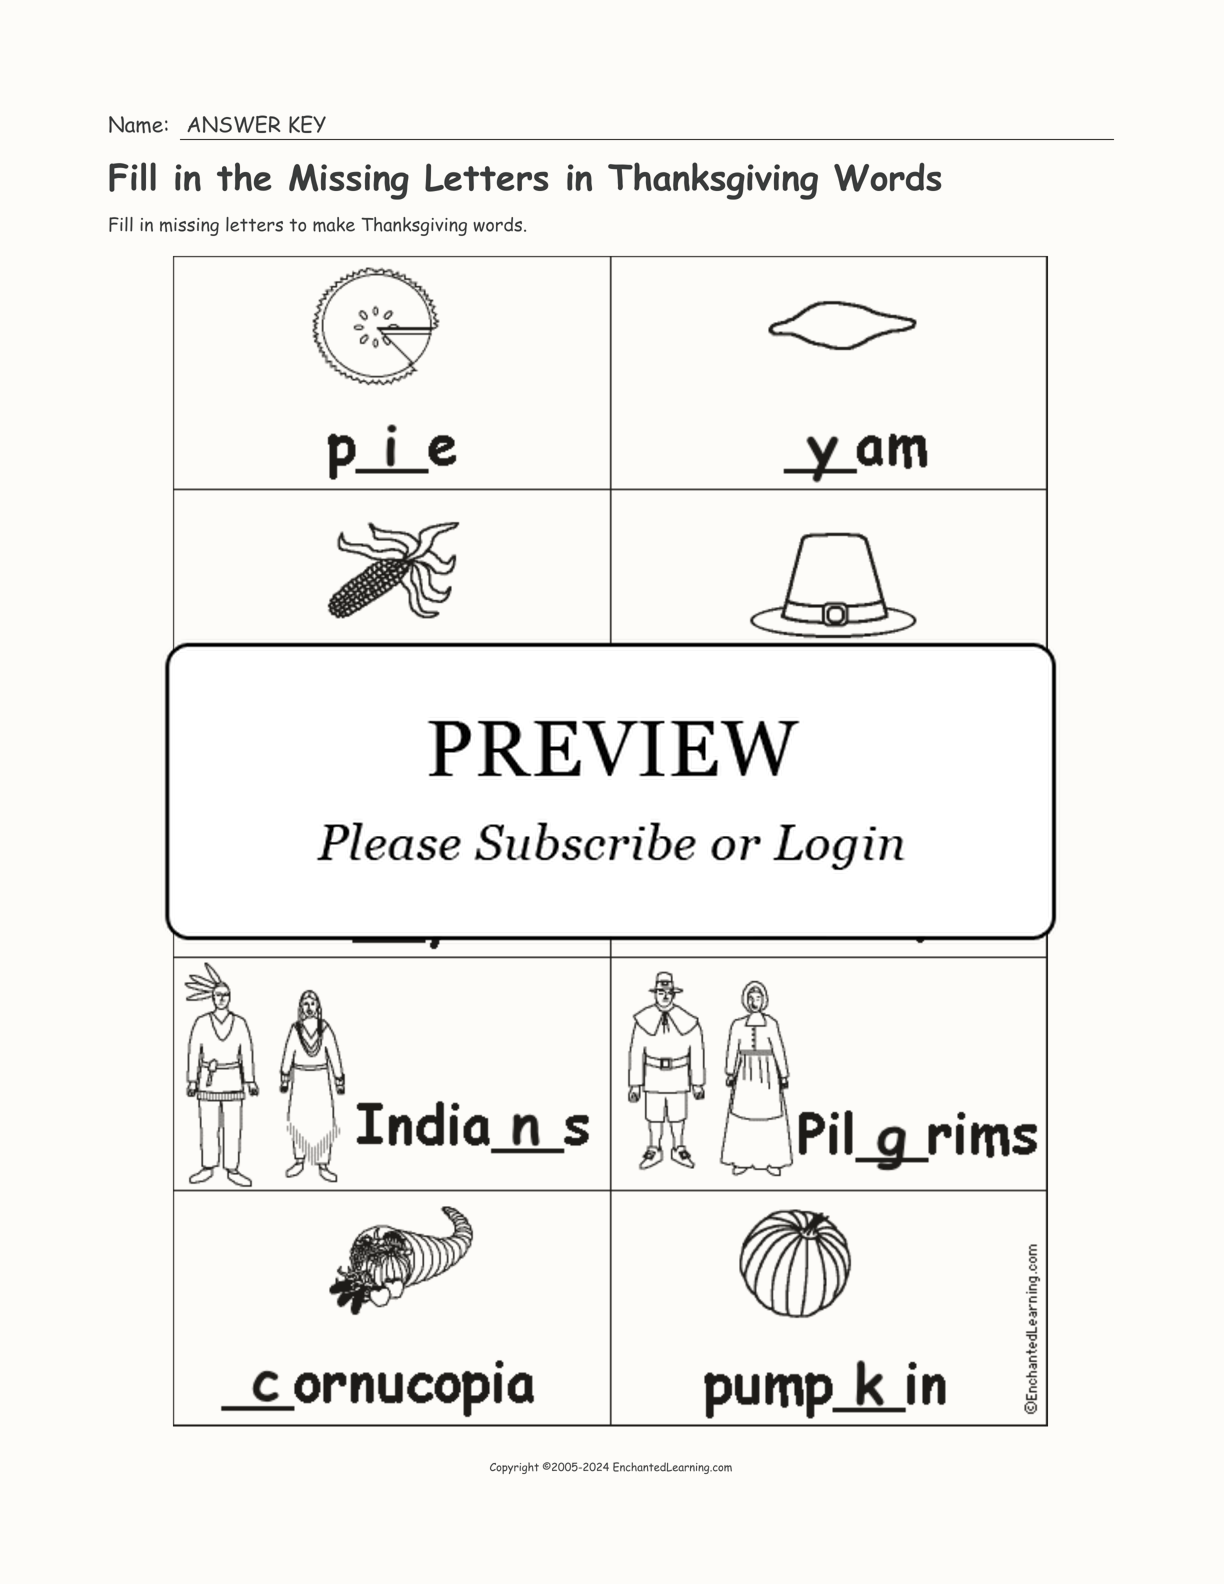 Fill in the Missing Letters in Thanksgiving Words interactive worksheet page 2